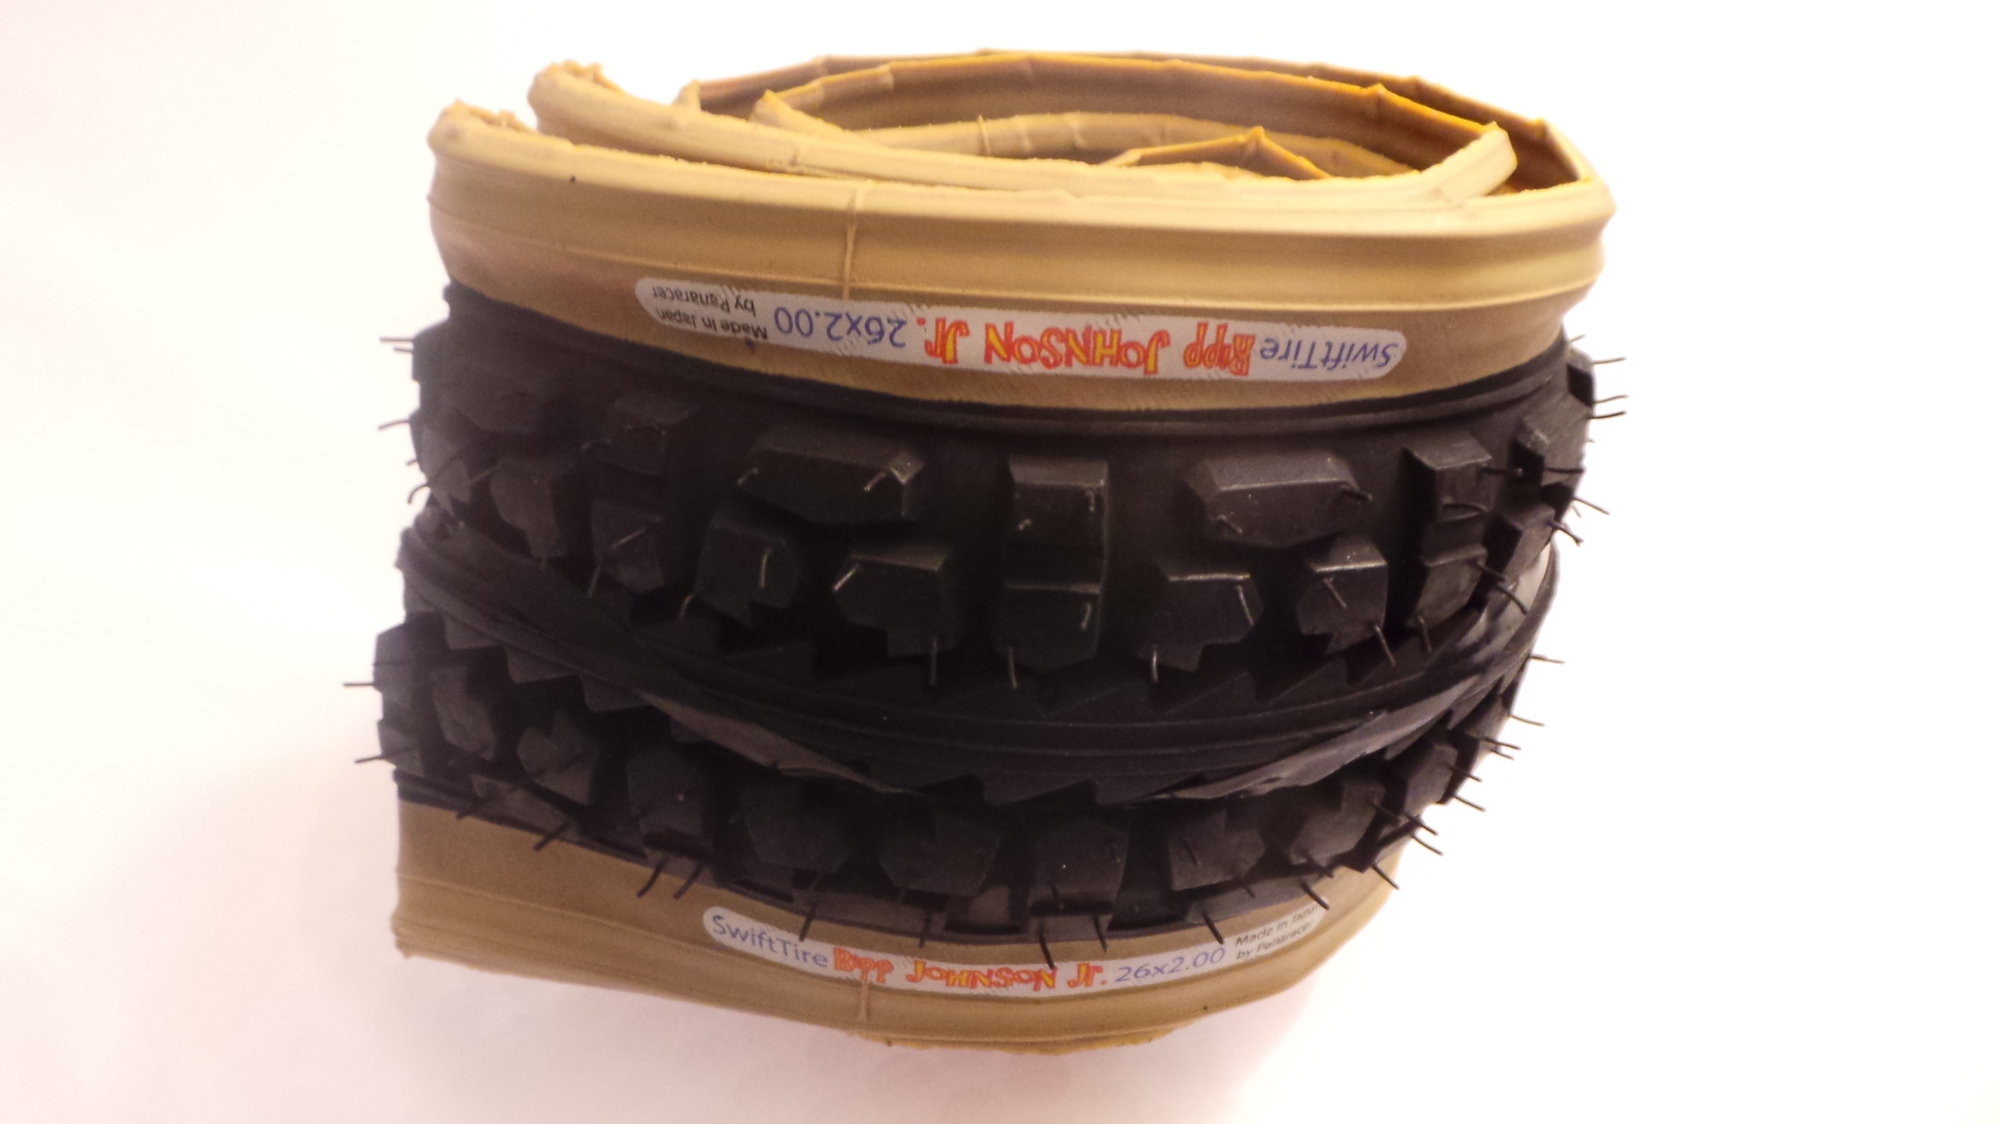 26 inch tan wall tyres